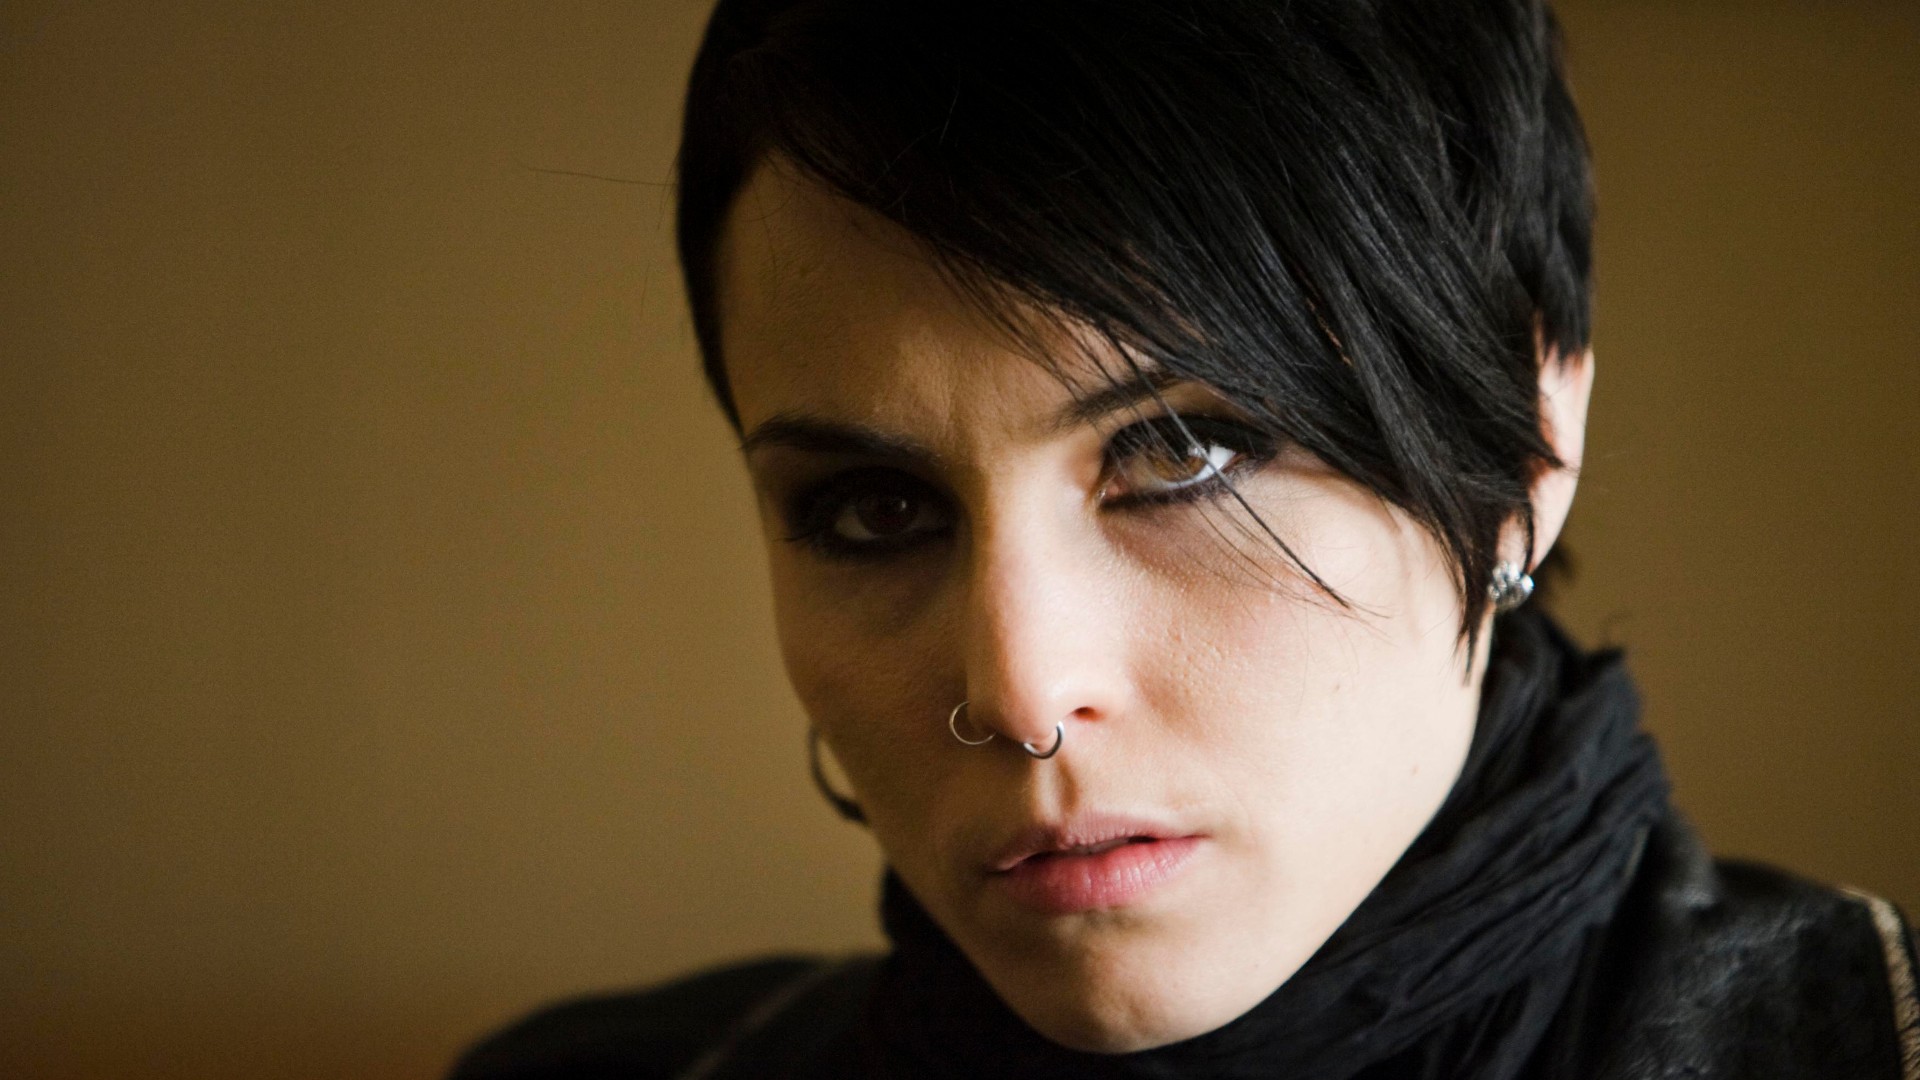 People 1920x1080 Noomi Rapace The Girl with the Dragon Tattoo short hair piercing dark hair women nose ring actress celebrity film stills